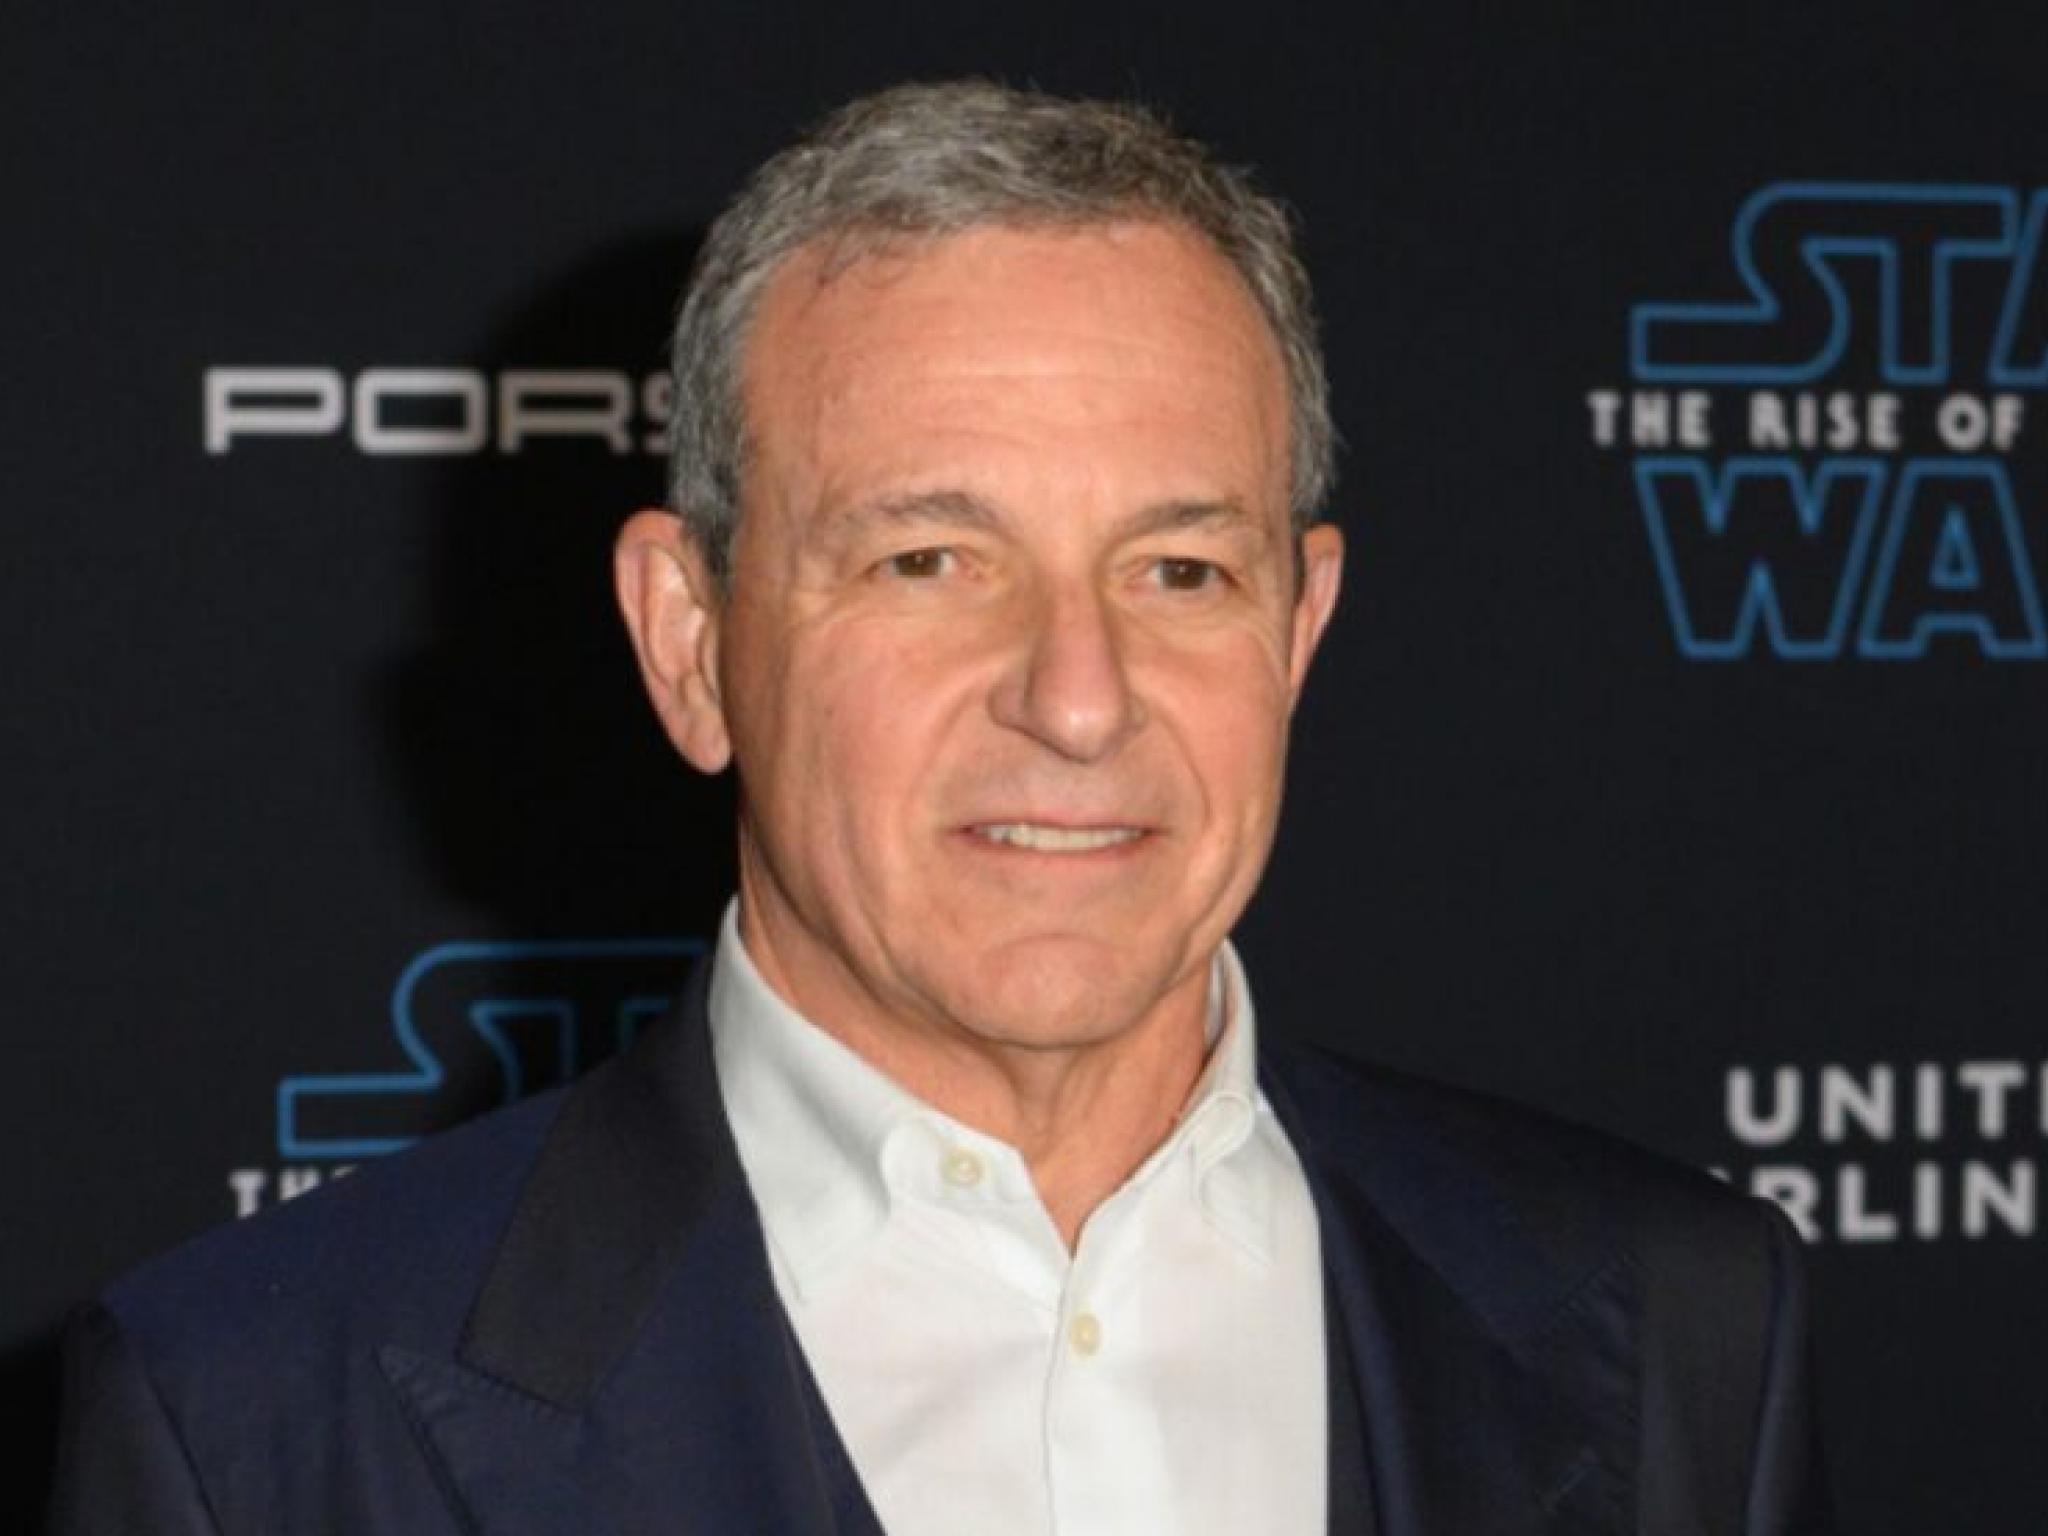  disney-ceo-bob-iger-nears-purchase-of-womens-soccer-club-could-set-record-for-priciest-womens-sports-team 